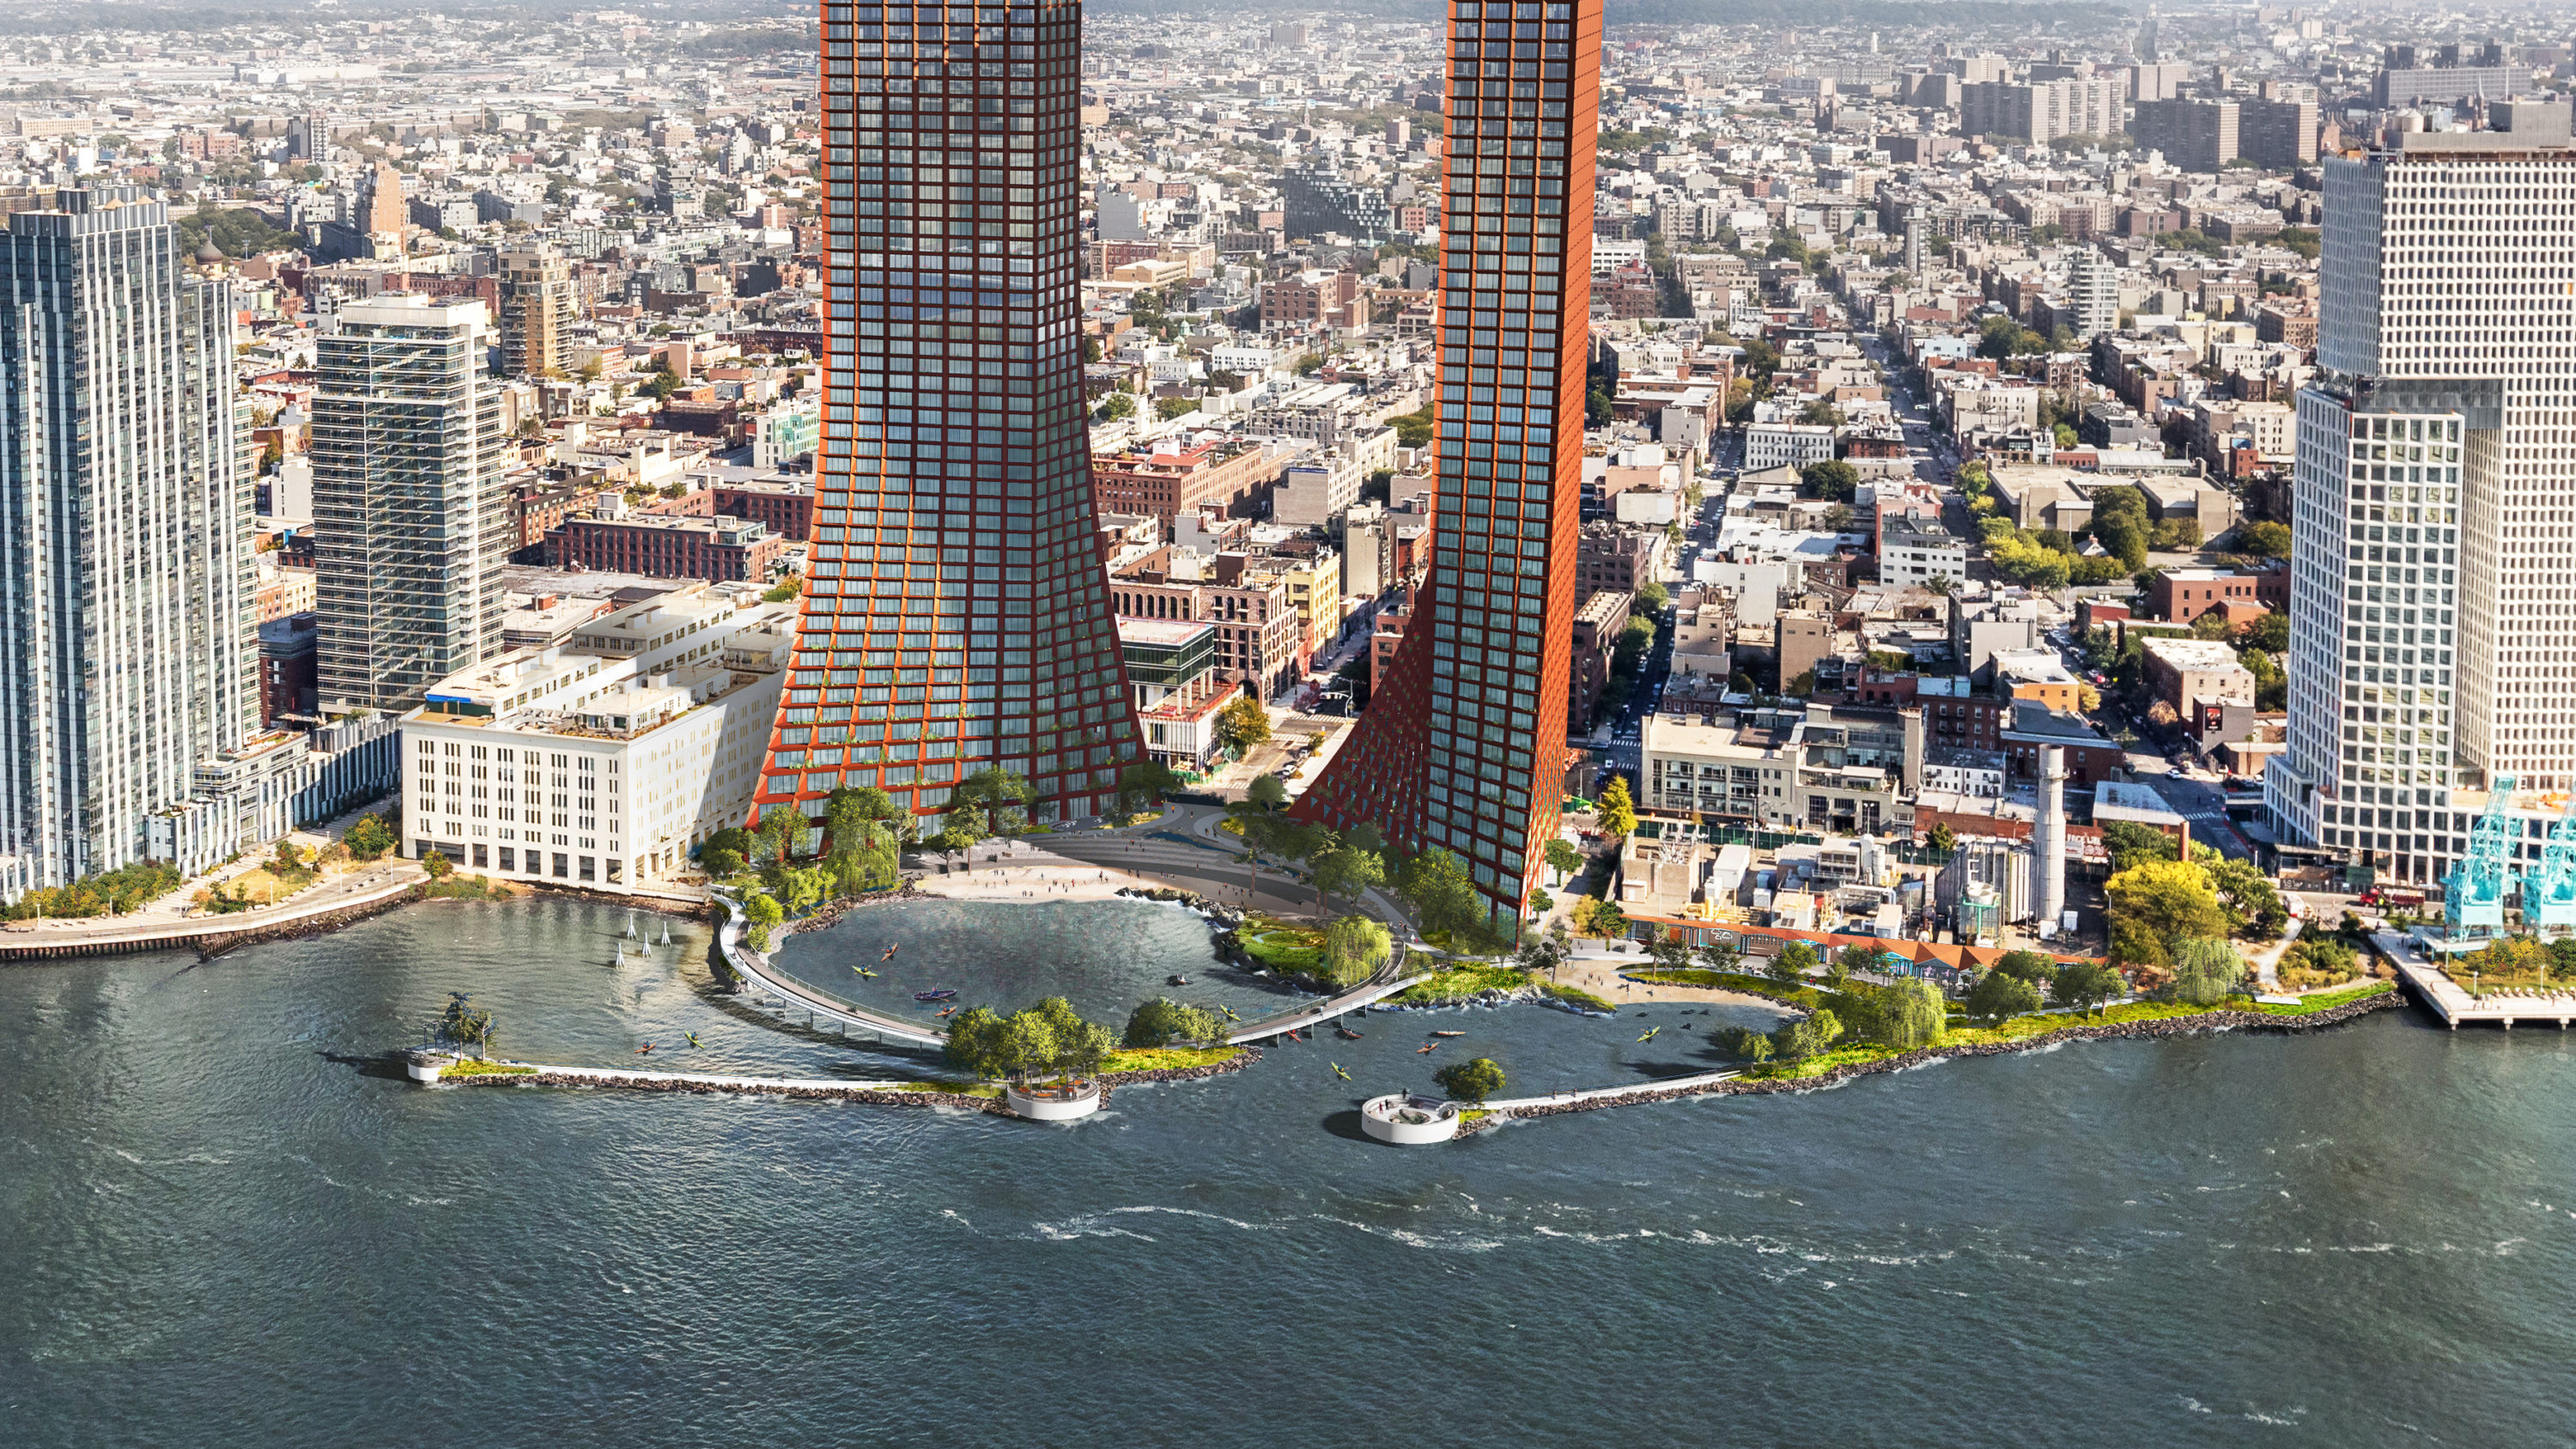 Two Trees Management will seek residential rezoning for its proposed River Street development, seen in the center of this image. Rendering by James Corner Field Operations and BIG-Bjarke Ingels Group courtesy of Two Trees Management